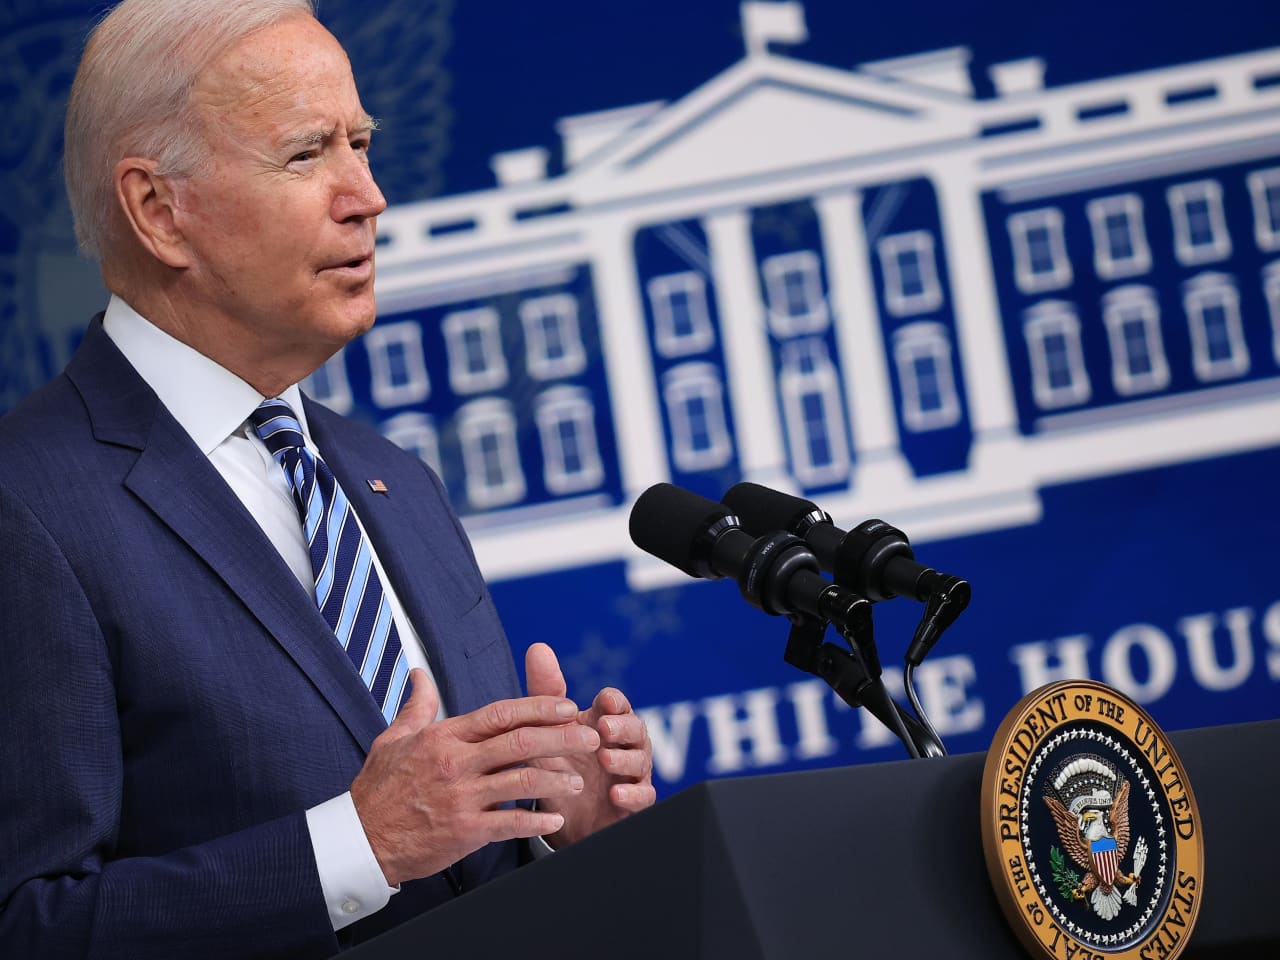 Biden Urges Insurance Companies to ‘Do The Right Thing’ Amid Hurricane Ida Recovery